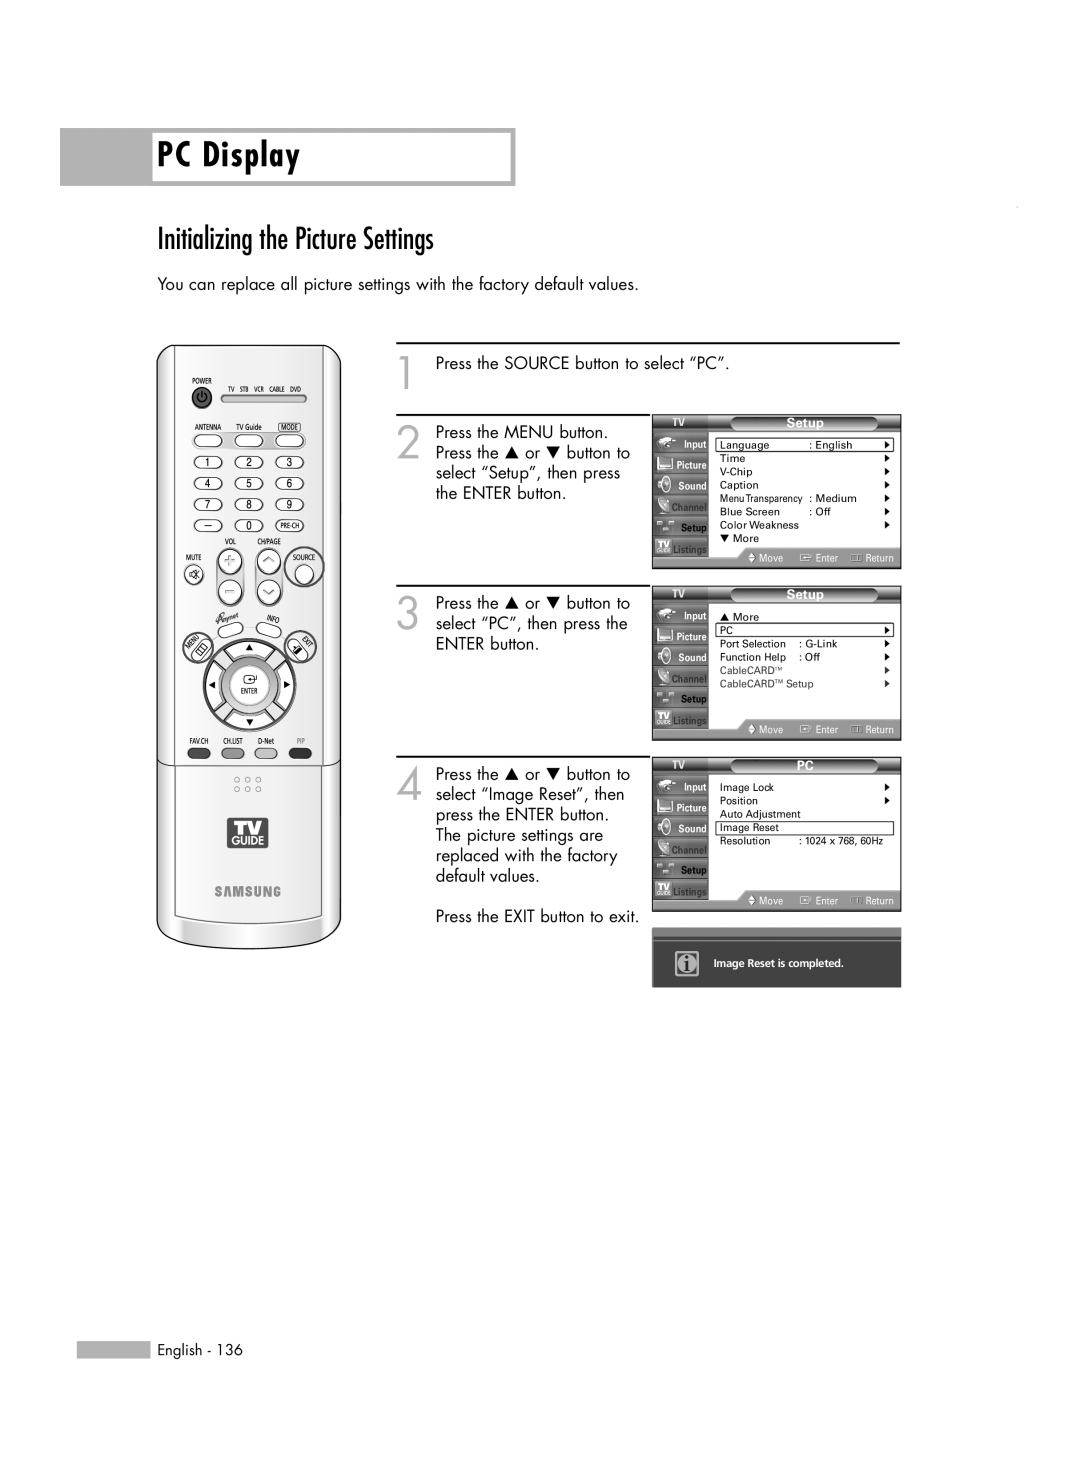 Samsung HL-R5688W manual Initializing the Picture Settings, PC Display 